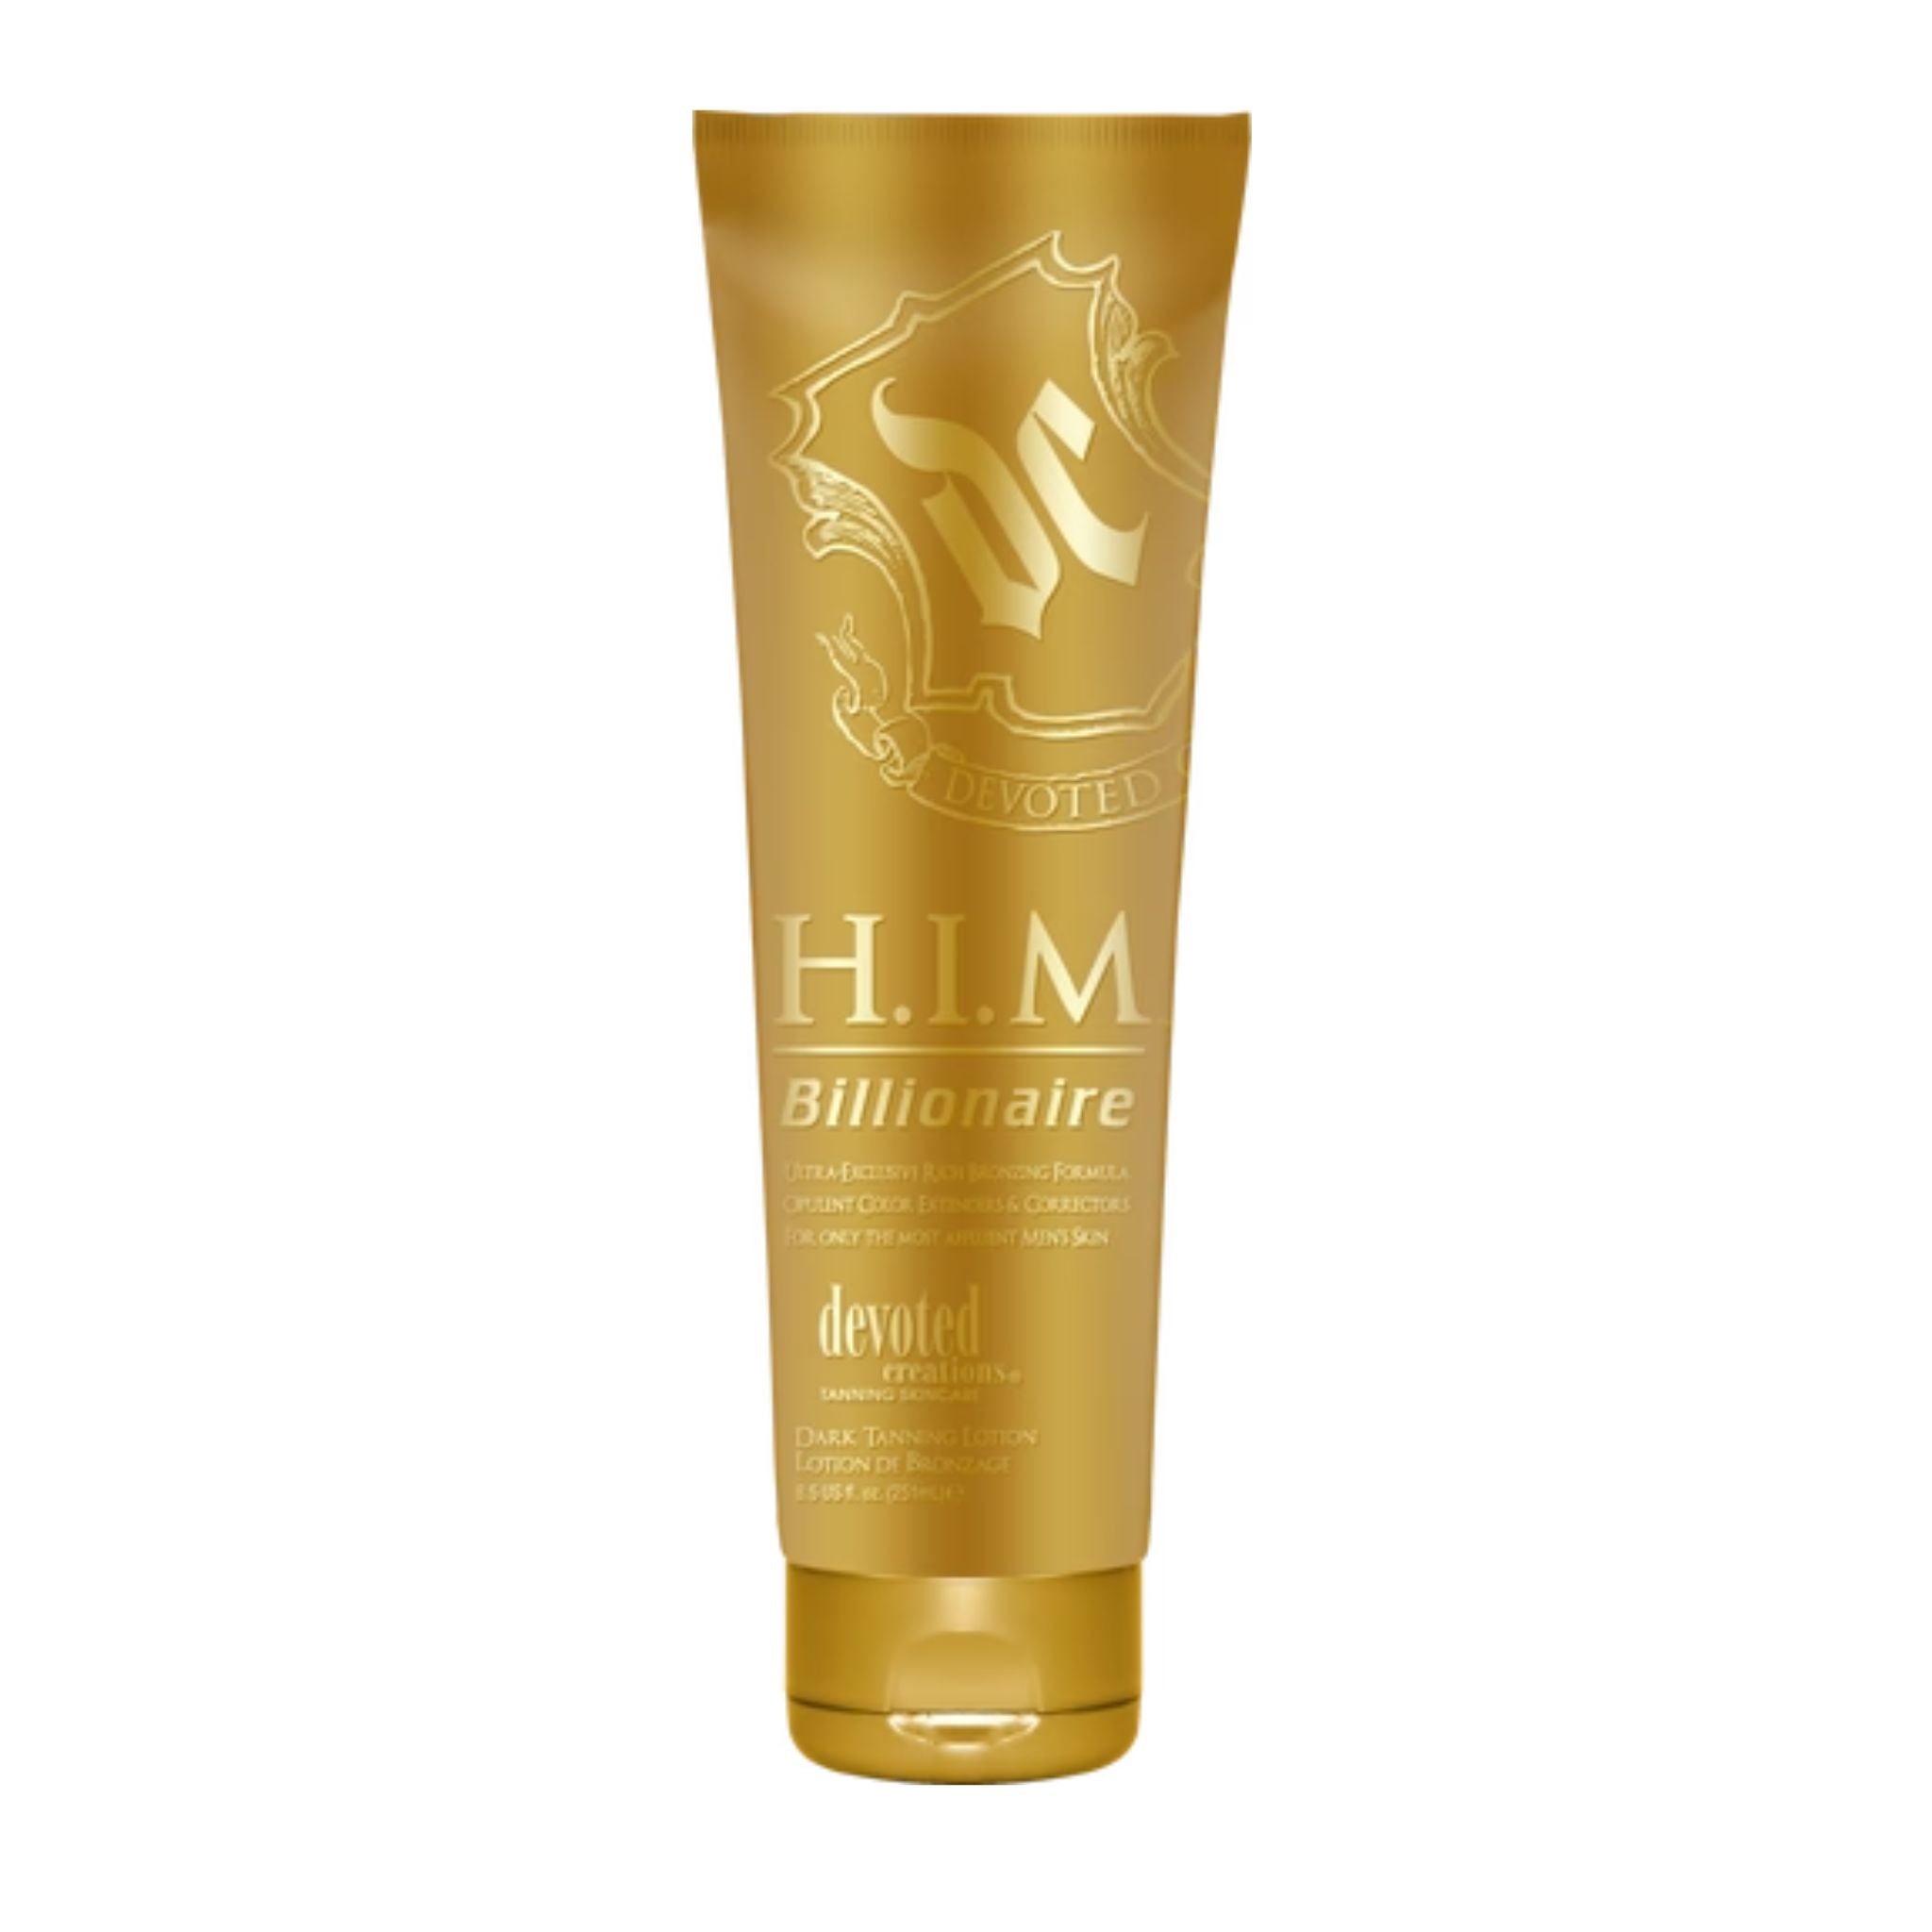 Devoted Creations H.I.M. Billionaire Tanning Lotion